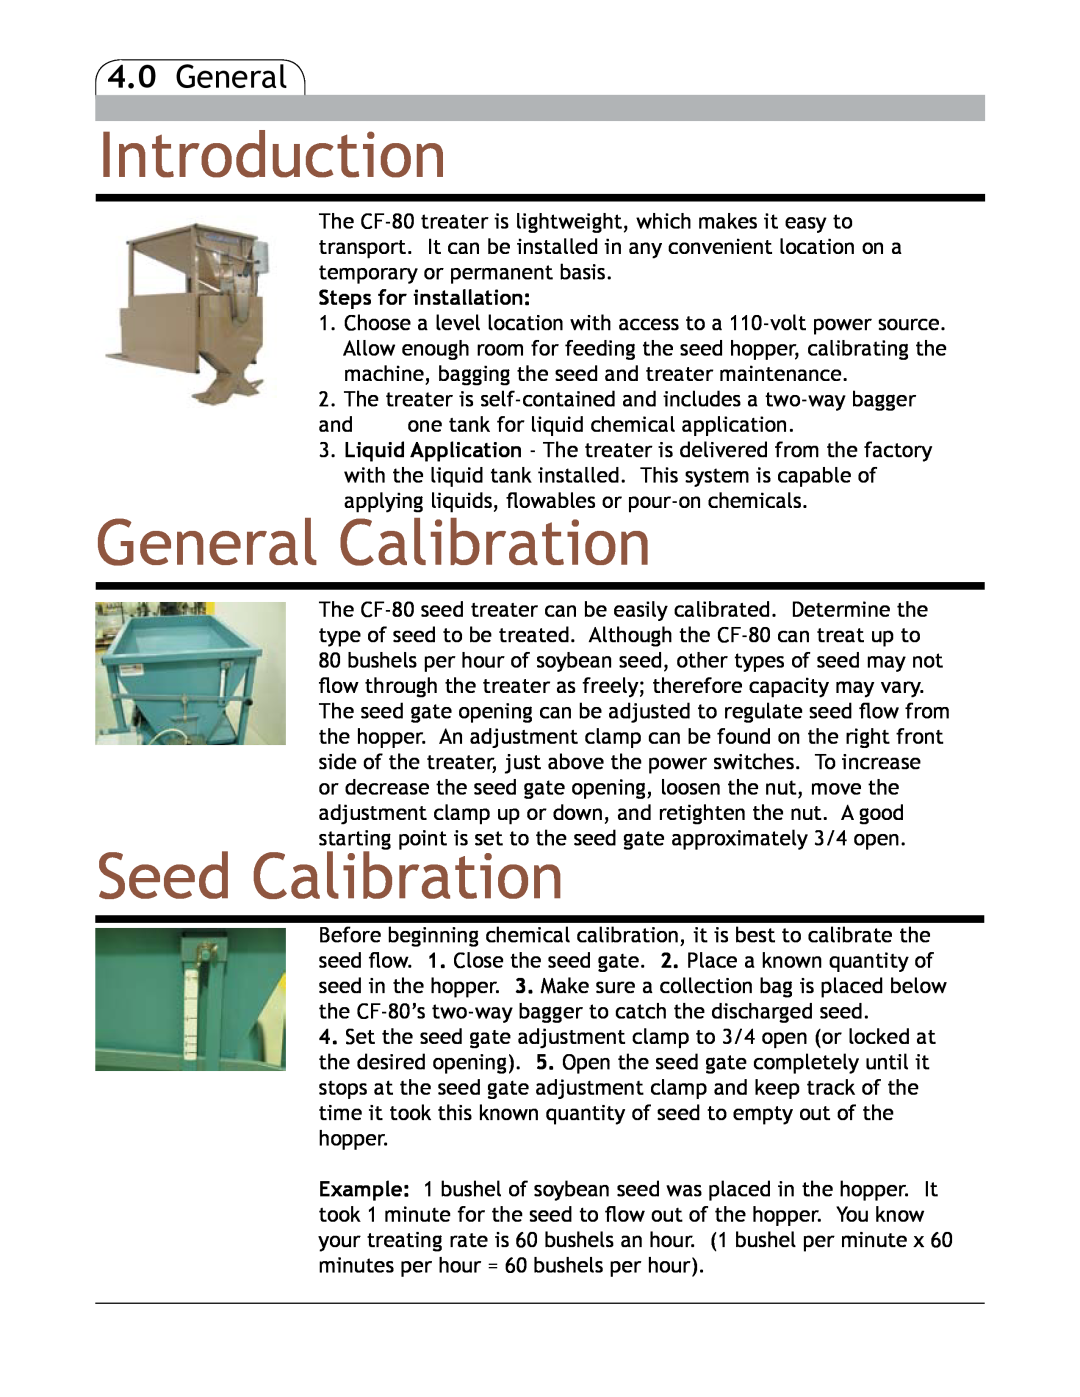 Bayer HealthCare CF-80 manual Introduction, General Calibration, Seed Calibration, Steps for installation 